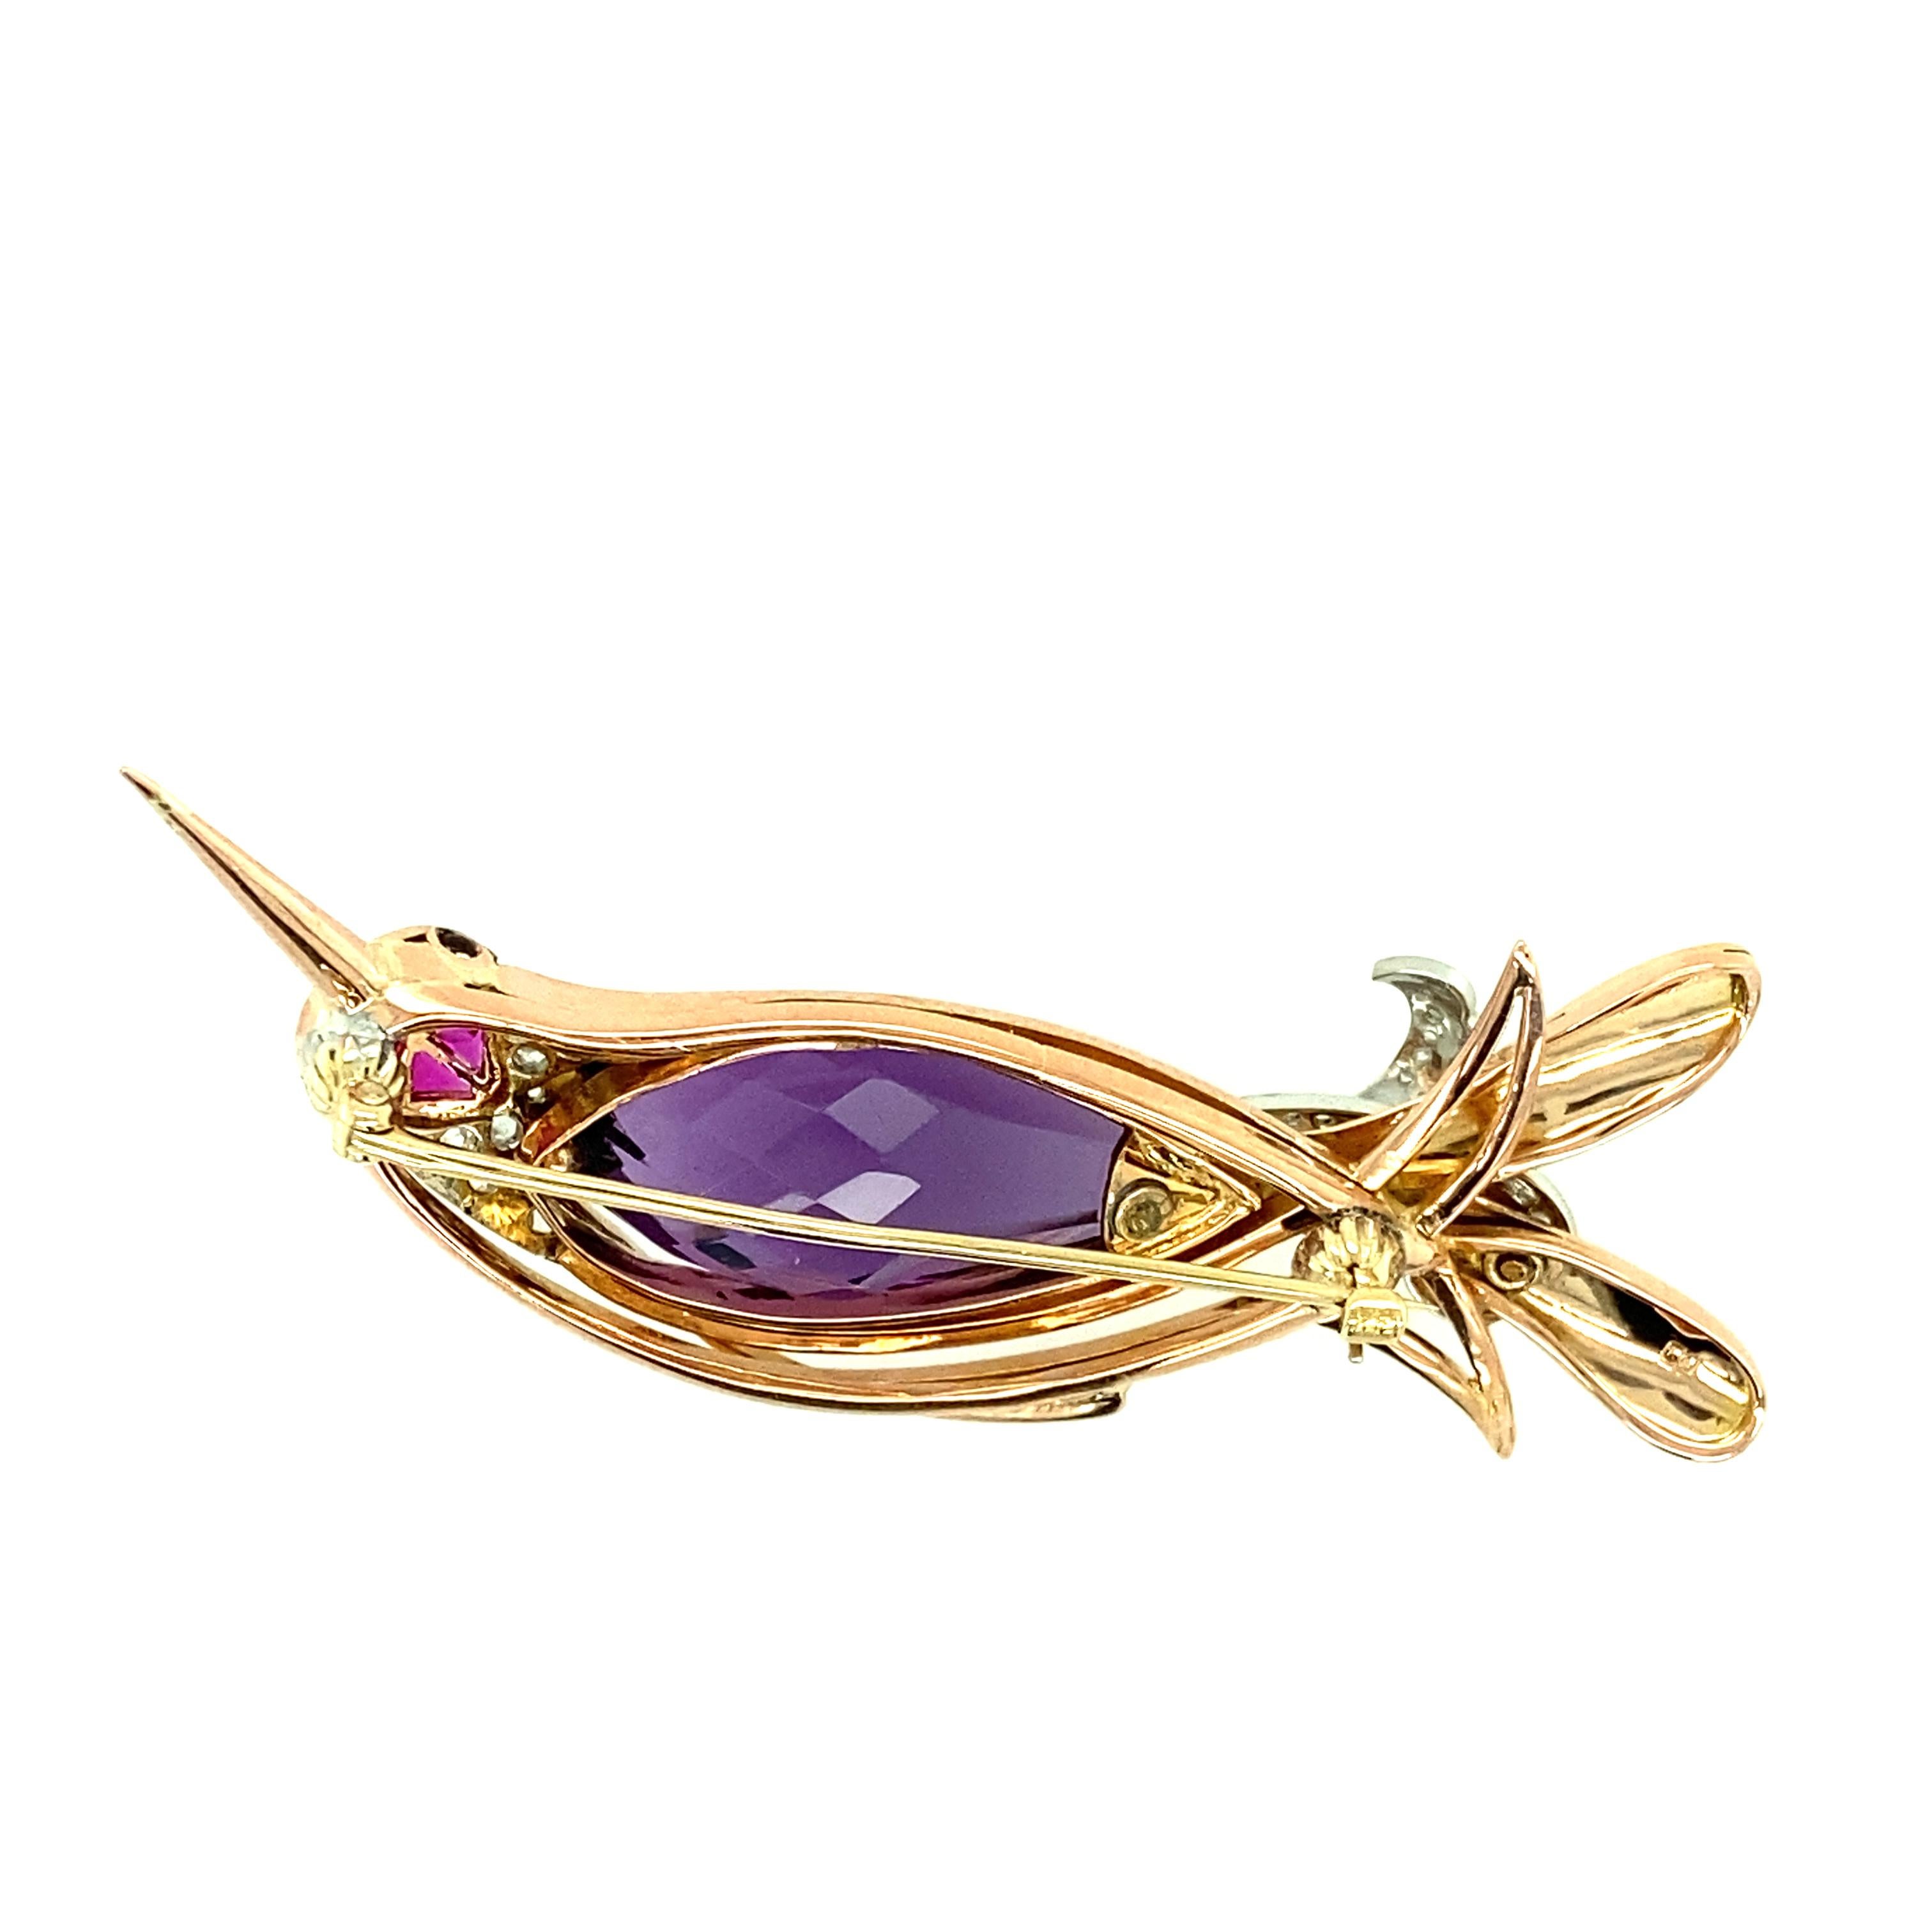 One 14 karat rose gold estate hummingbird pin set with one 1 inch x 11mm amethyst, ten pink sapphires, and twenty-four rose cut diamonds, 0.65 carat total weight with matching I/J color and SI1 clarity.  The pin measures 2.5 inches long and is